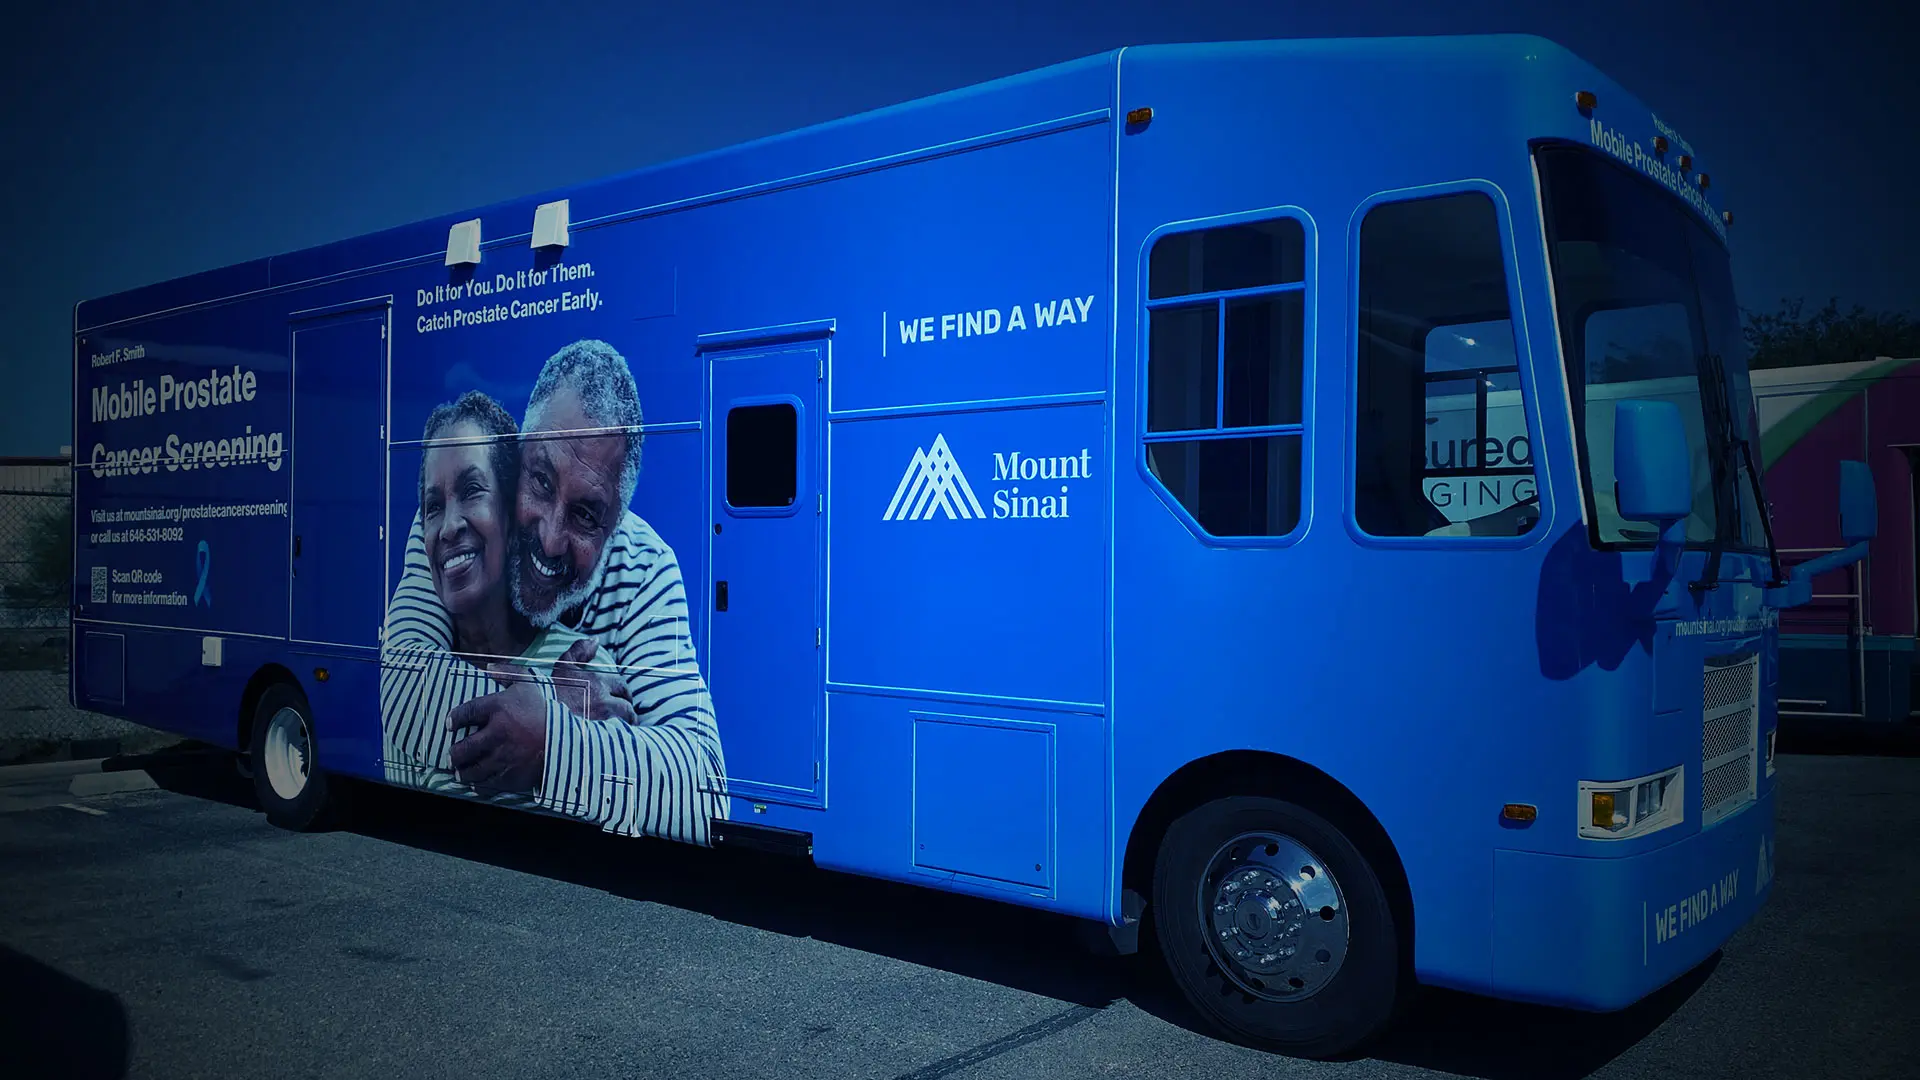 With a $3.8 Million Gift, Mount Sinai Prepares to Launch Mobile Prostate Cancer Screening Unit to Support Prostate Health in the Black Community